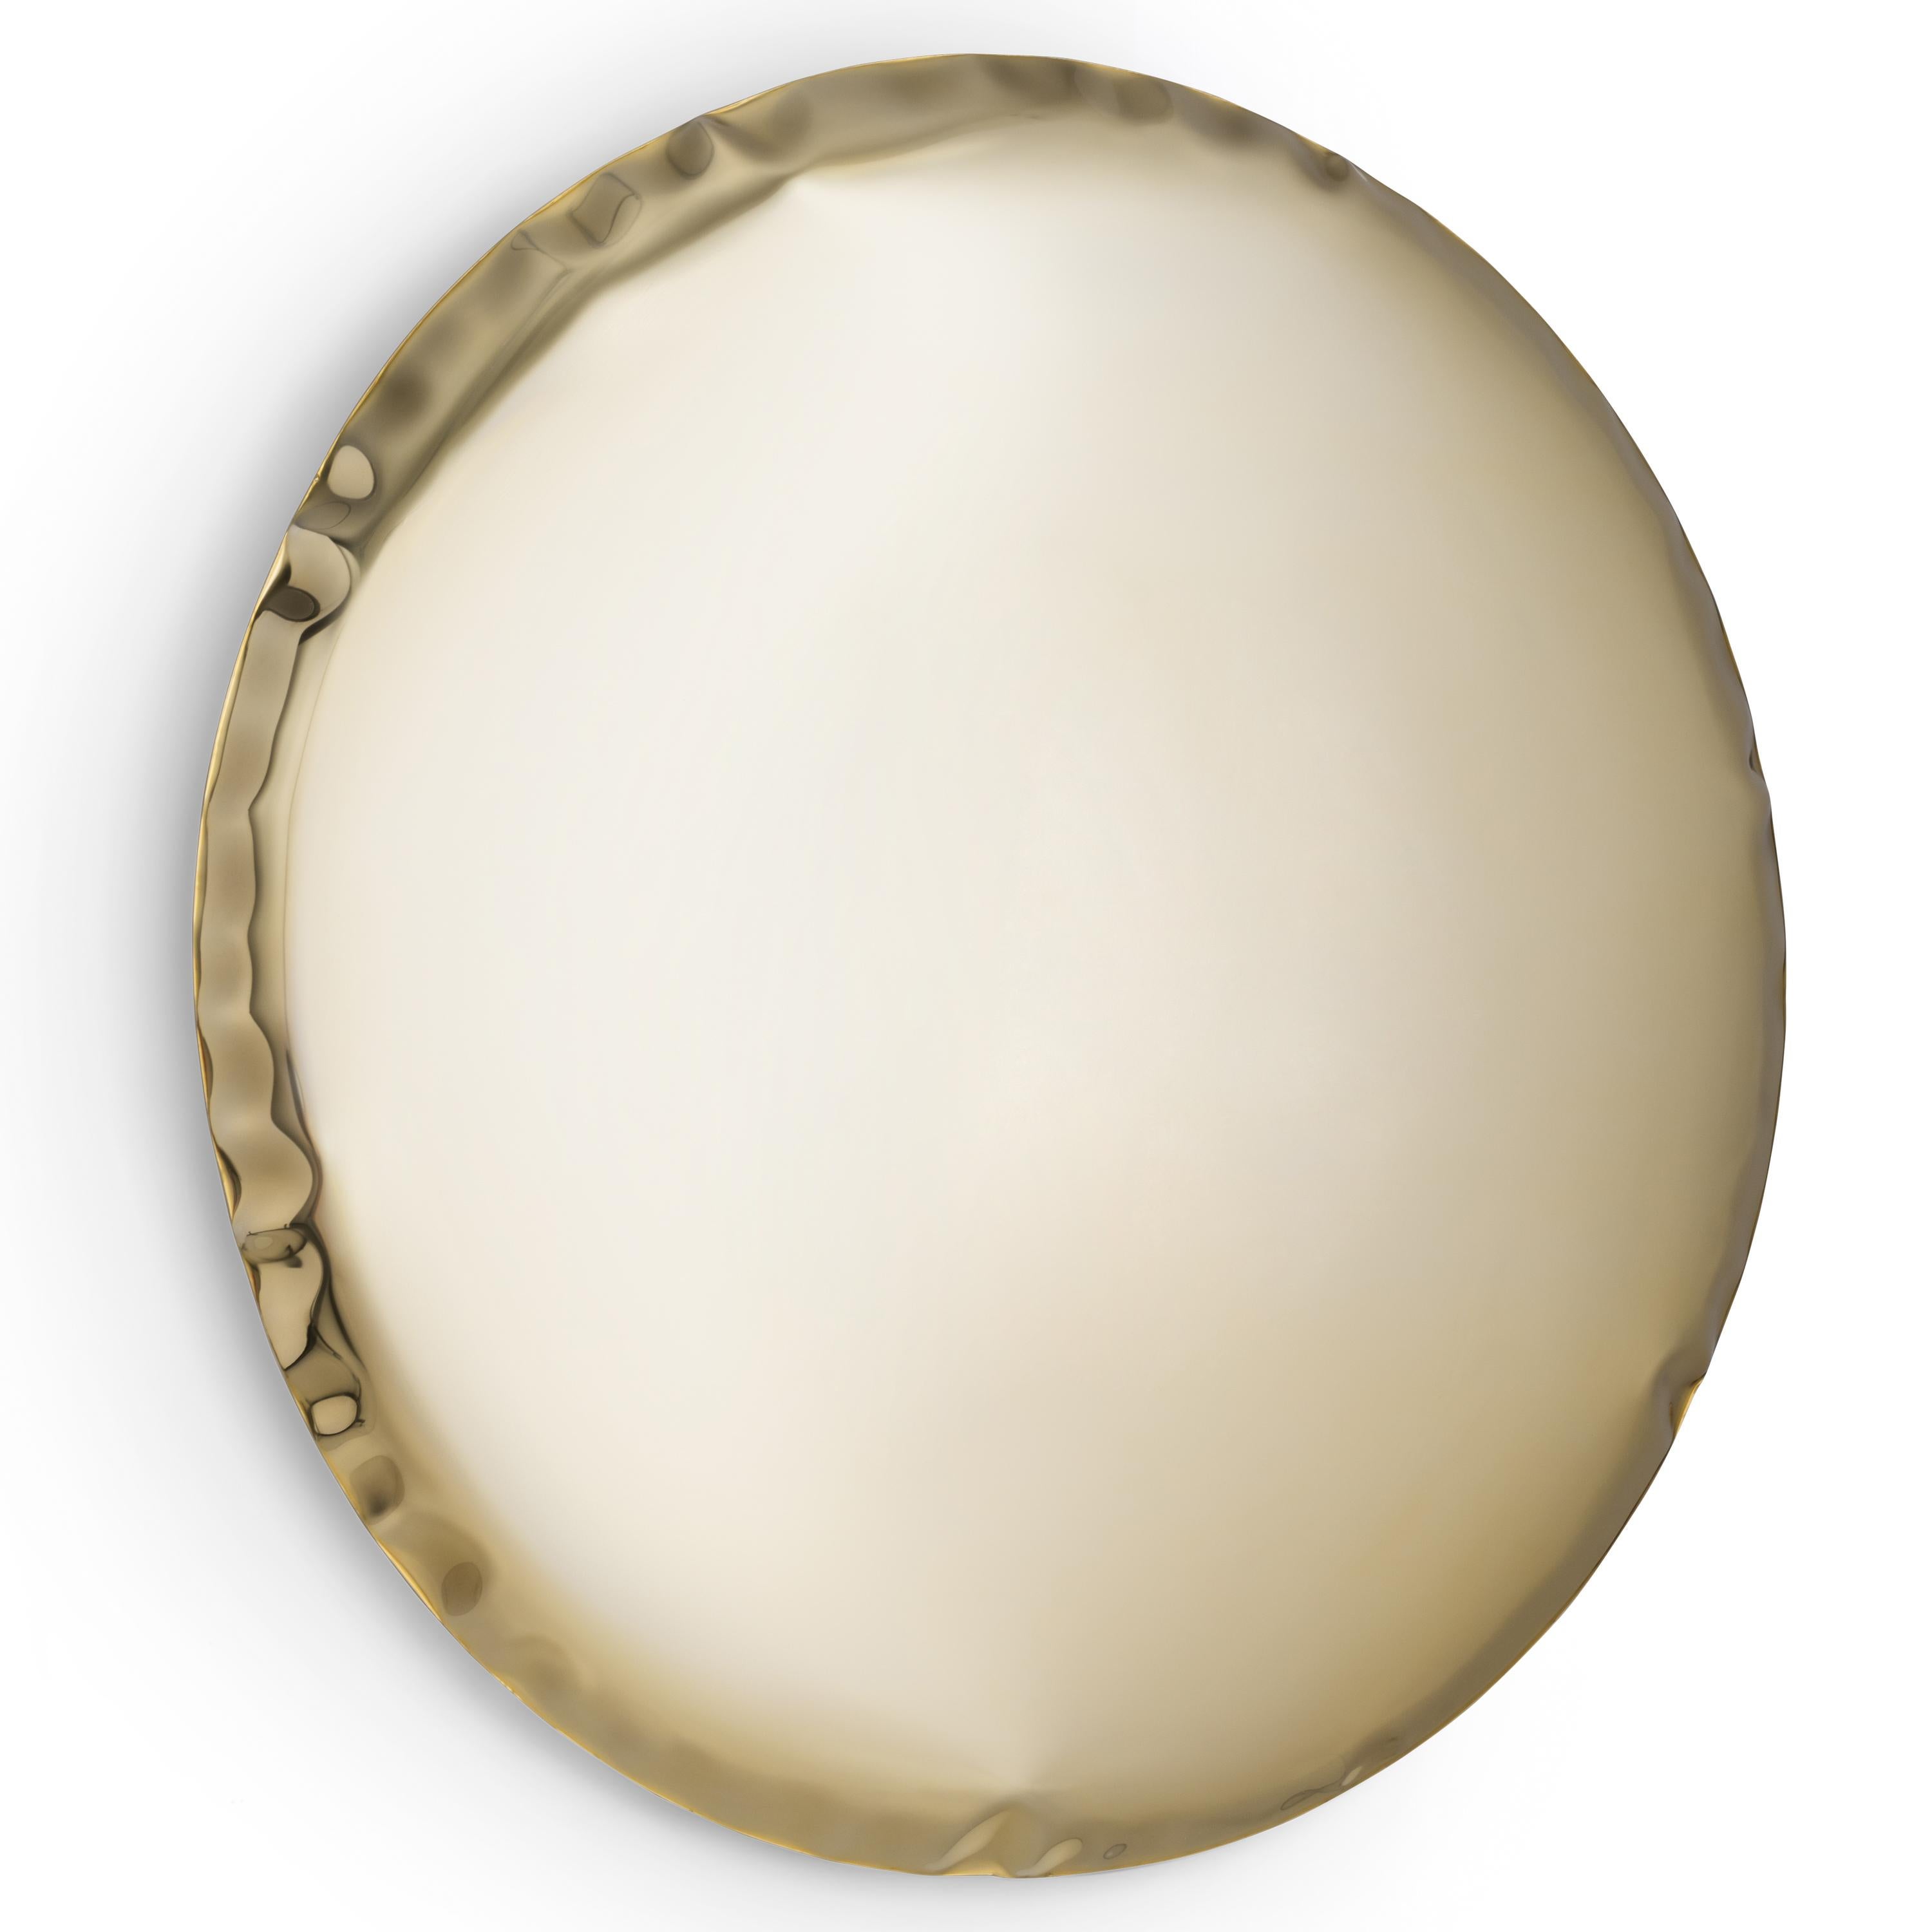 OKO 150 by Zieta
Original mirror by Zieta, delivered with certificate. 

Collection: AURUM 

Measures: 150cm
Polished stainless steel
Finish: Light Gold

--
Zieta Studio is a brand established in 2010 by Oskar Zieta – an architect and innovator,